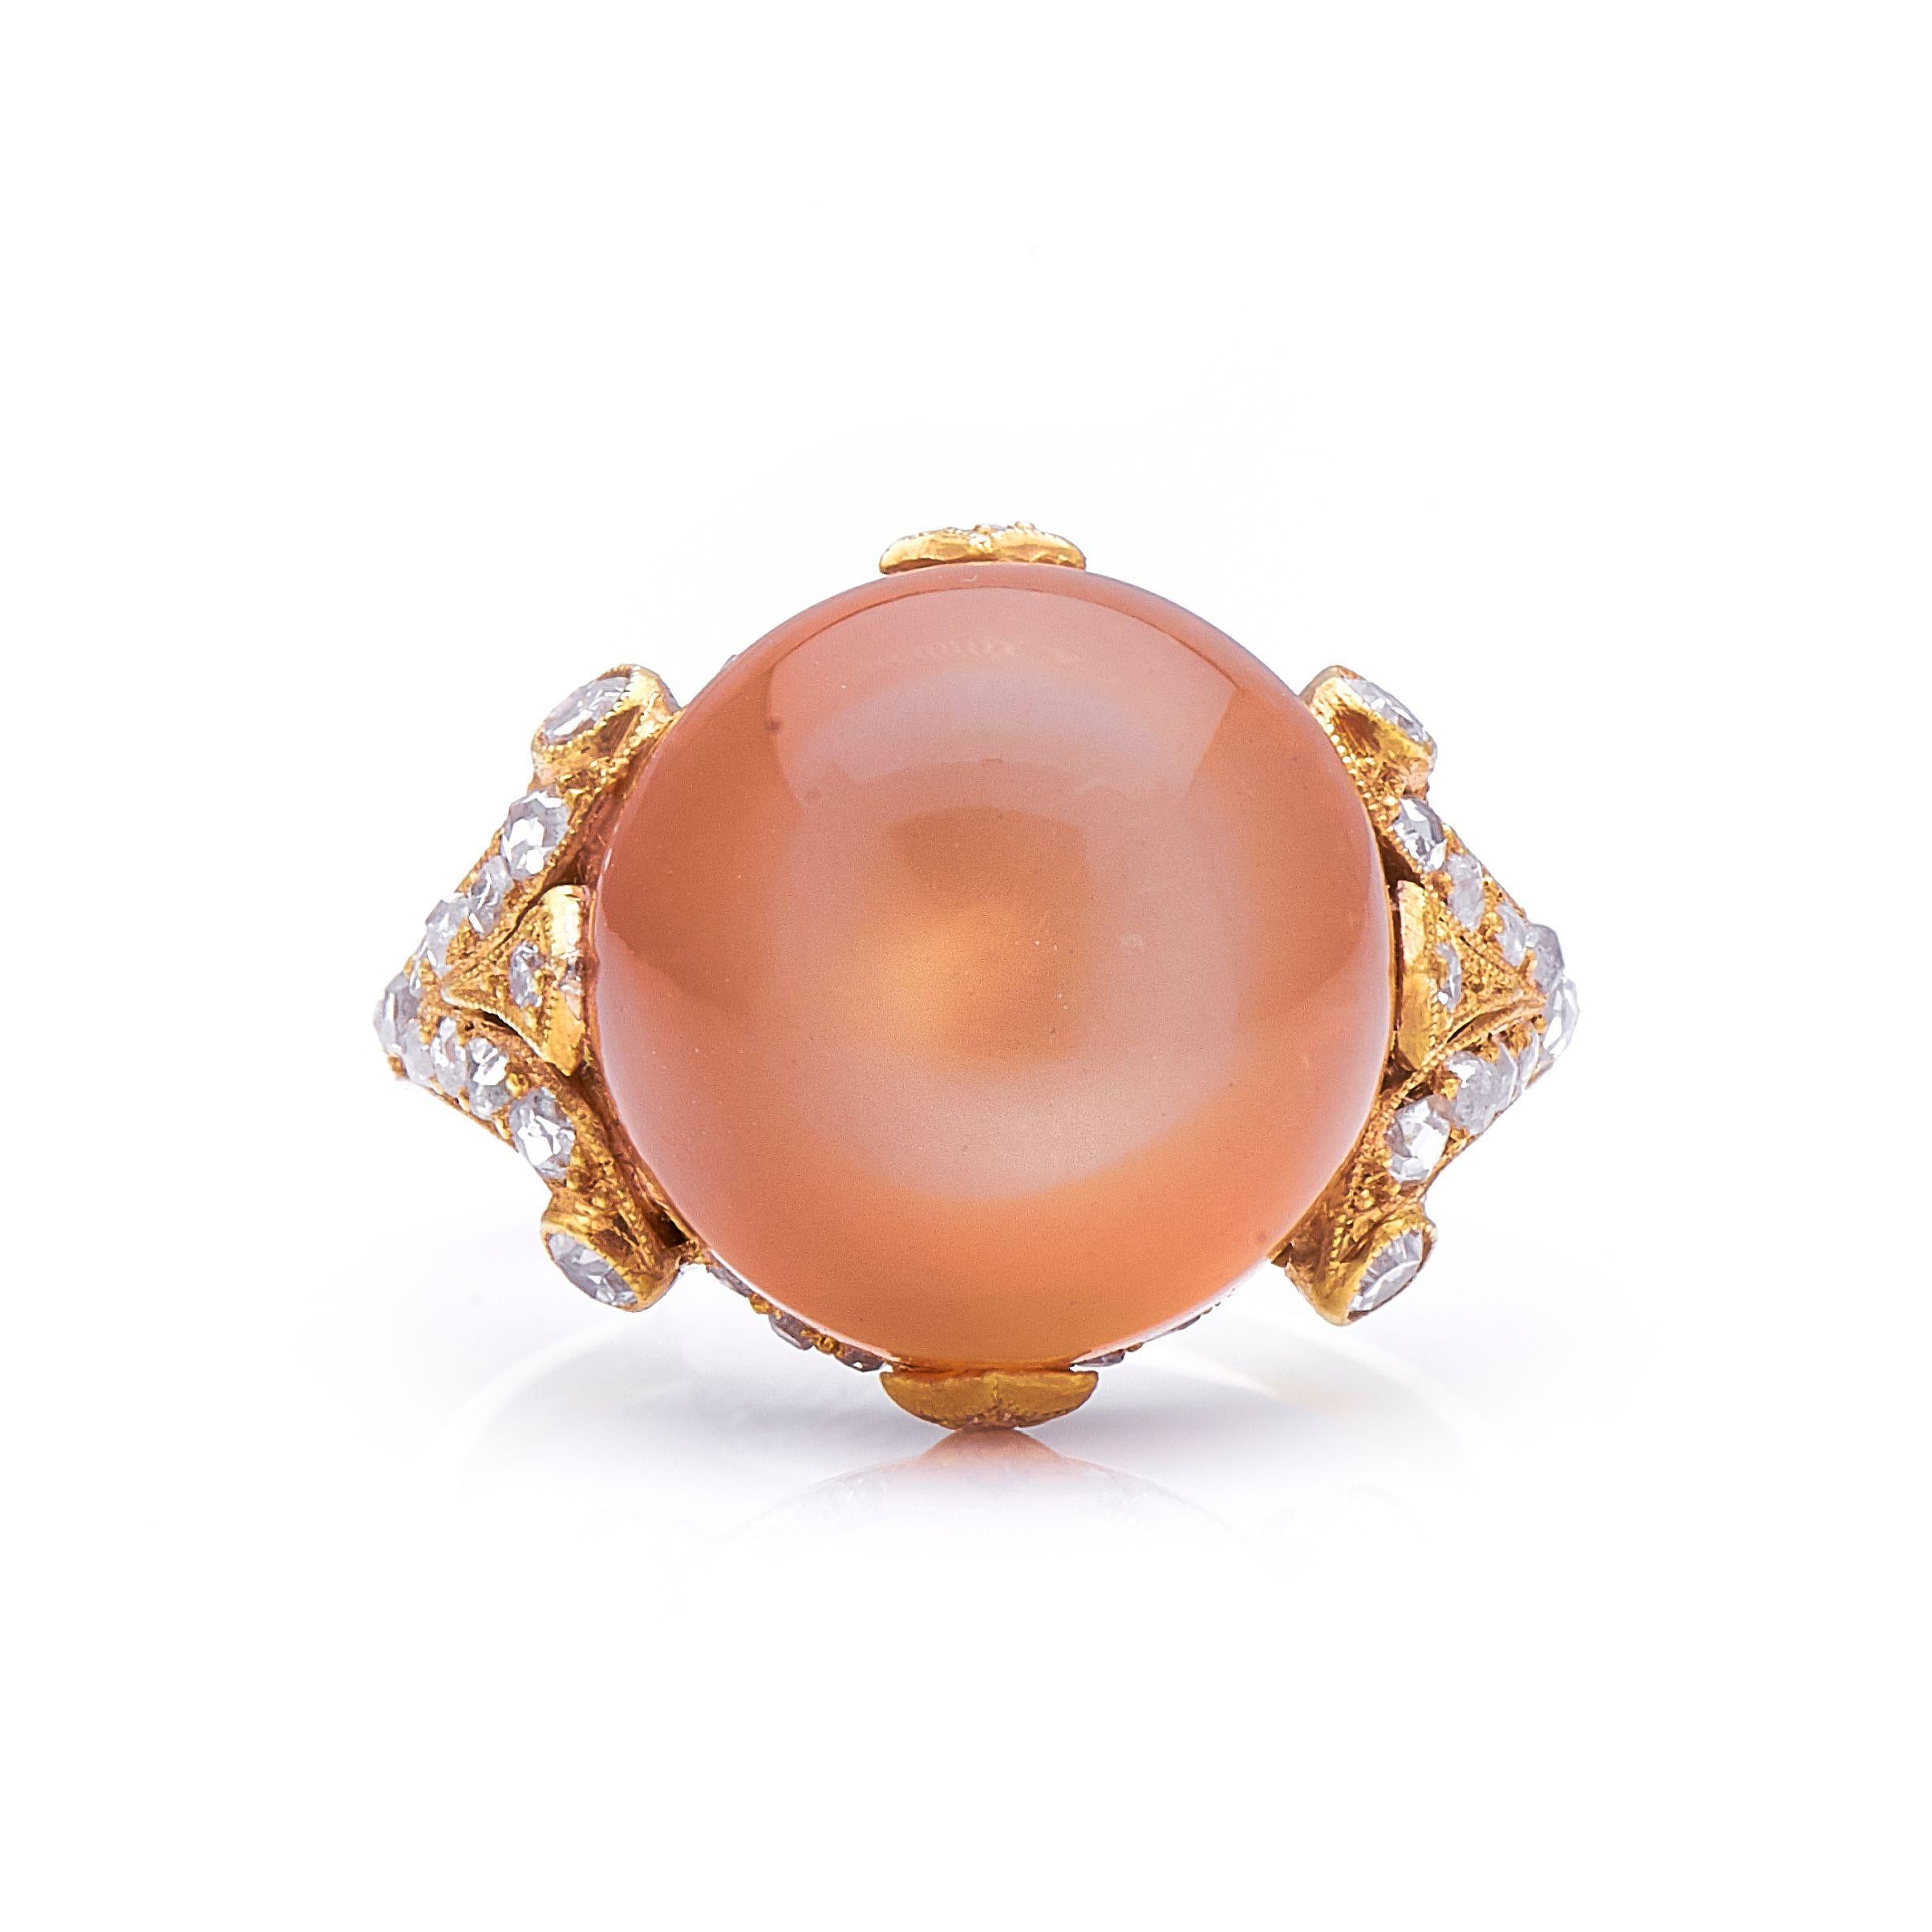 Moonstone and diamond ring, circa 1910. At the heart of this ring is a wonderful peach coloured moonstone with a characteristic white sheen, held in a finely millegrained mount in warm yellow gold with delicately scrolled shoulders. The distinctive